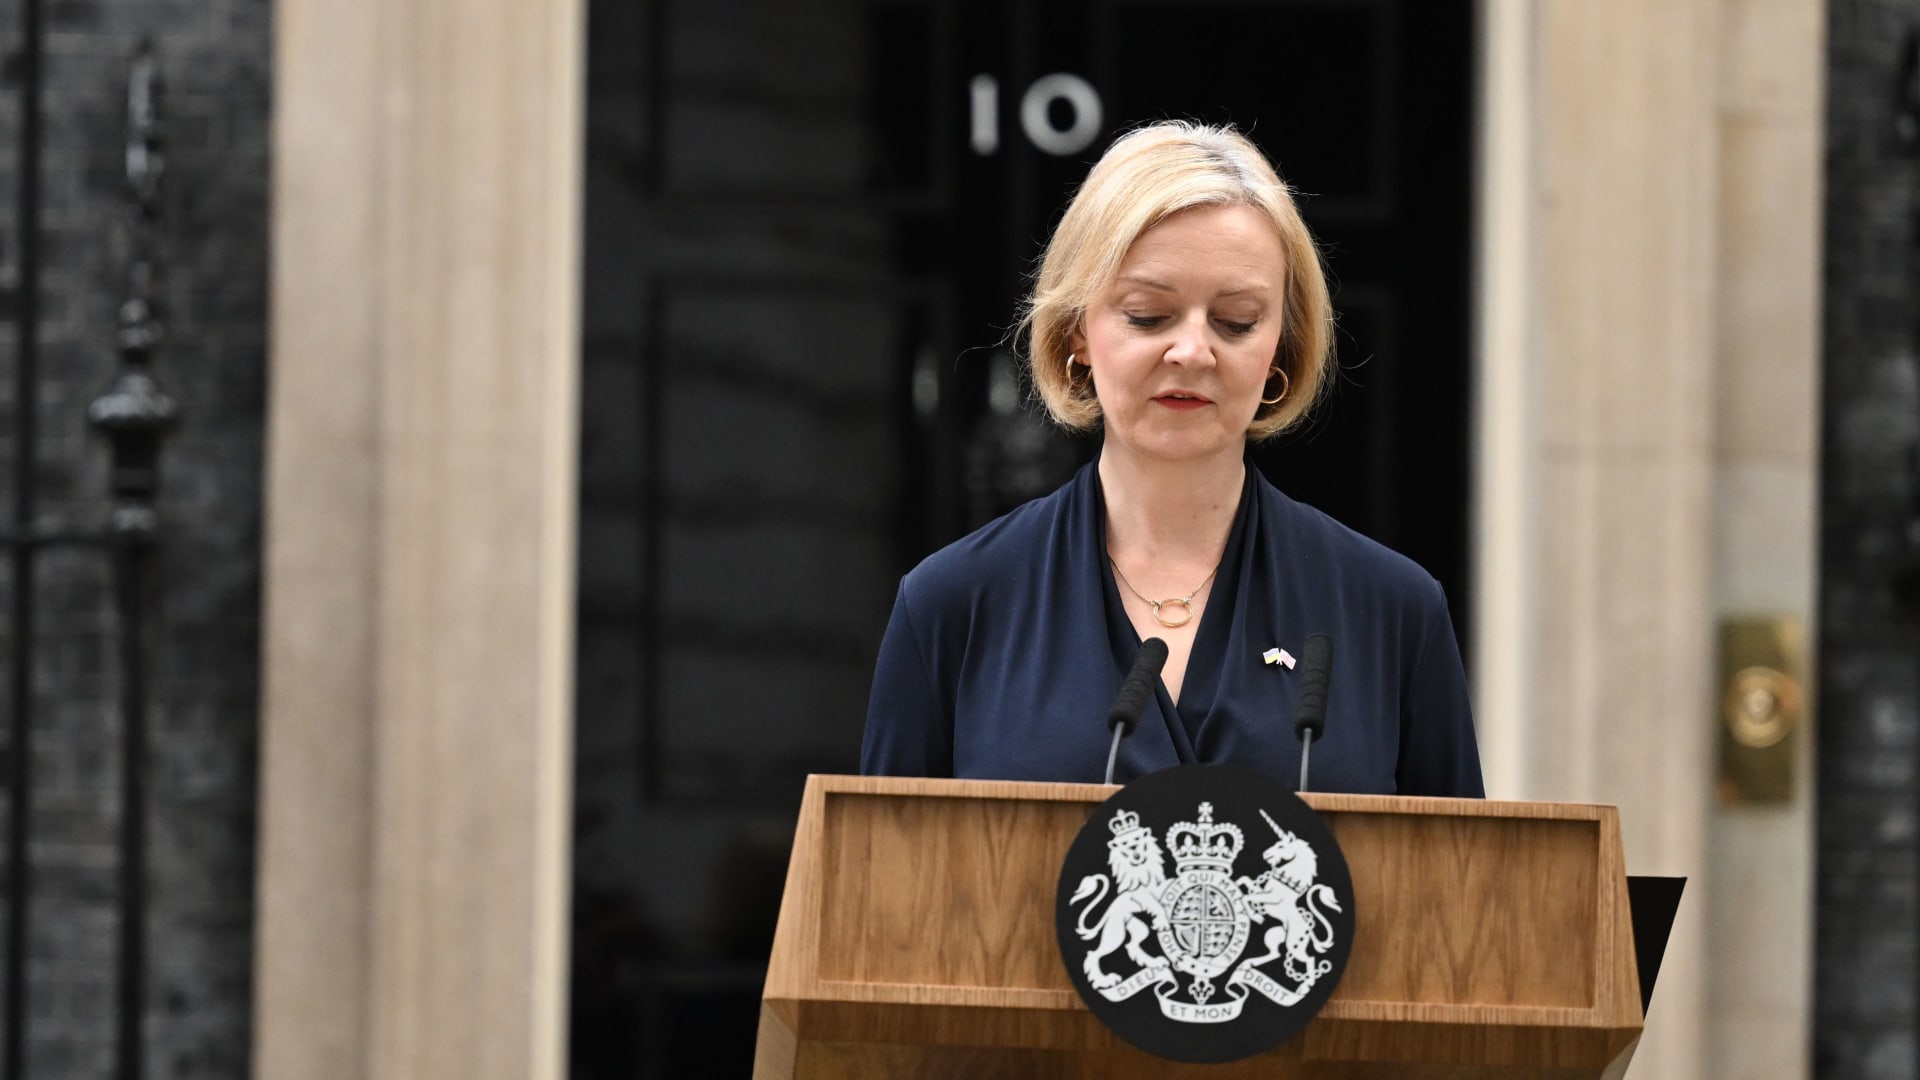 Prime Minister Liz Truss announces her resignation at 10 Downing Street on Oct. 20, 2022 in London, England.